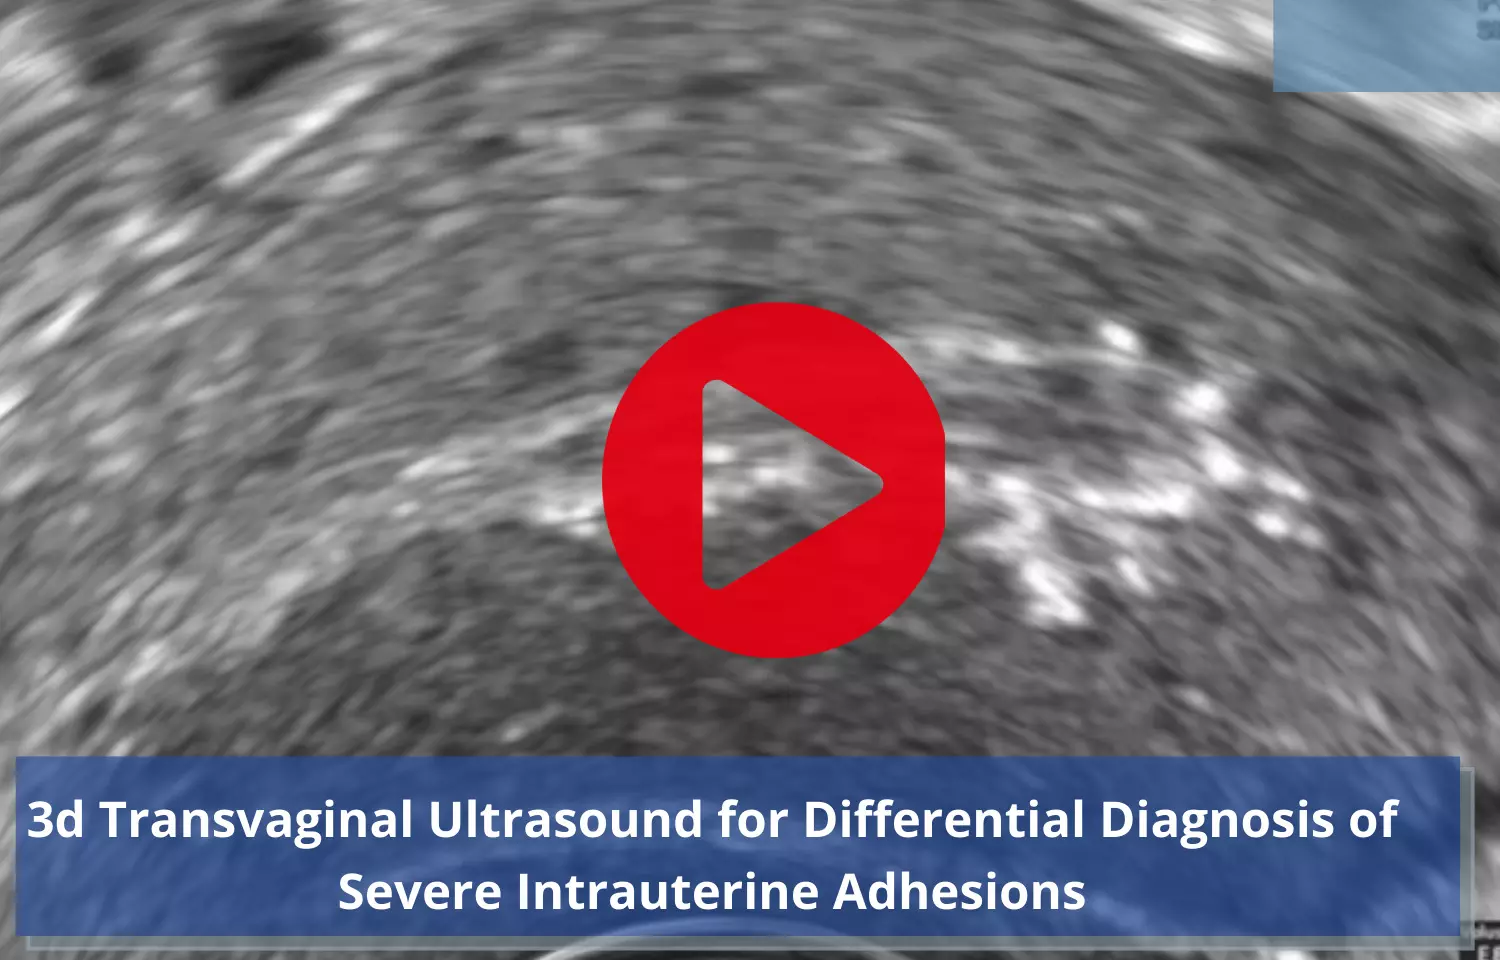 3D Transvaginal Ultrasound as Differential Diagnosis of Severe Intrauterine Adhesions